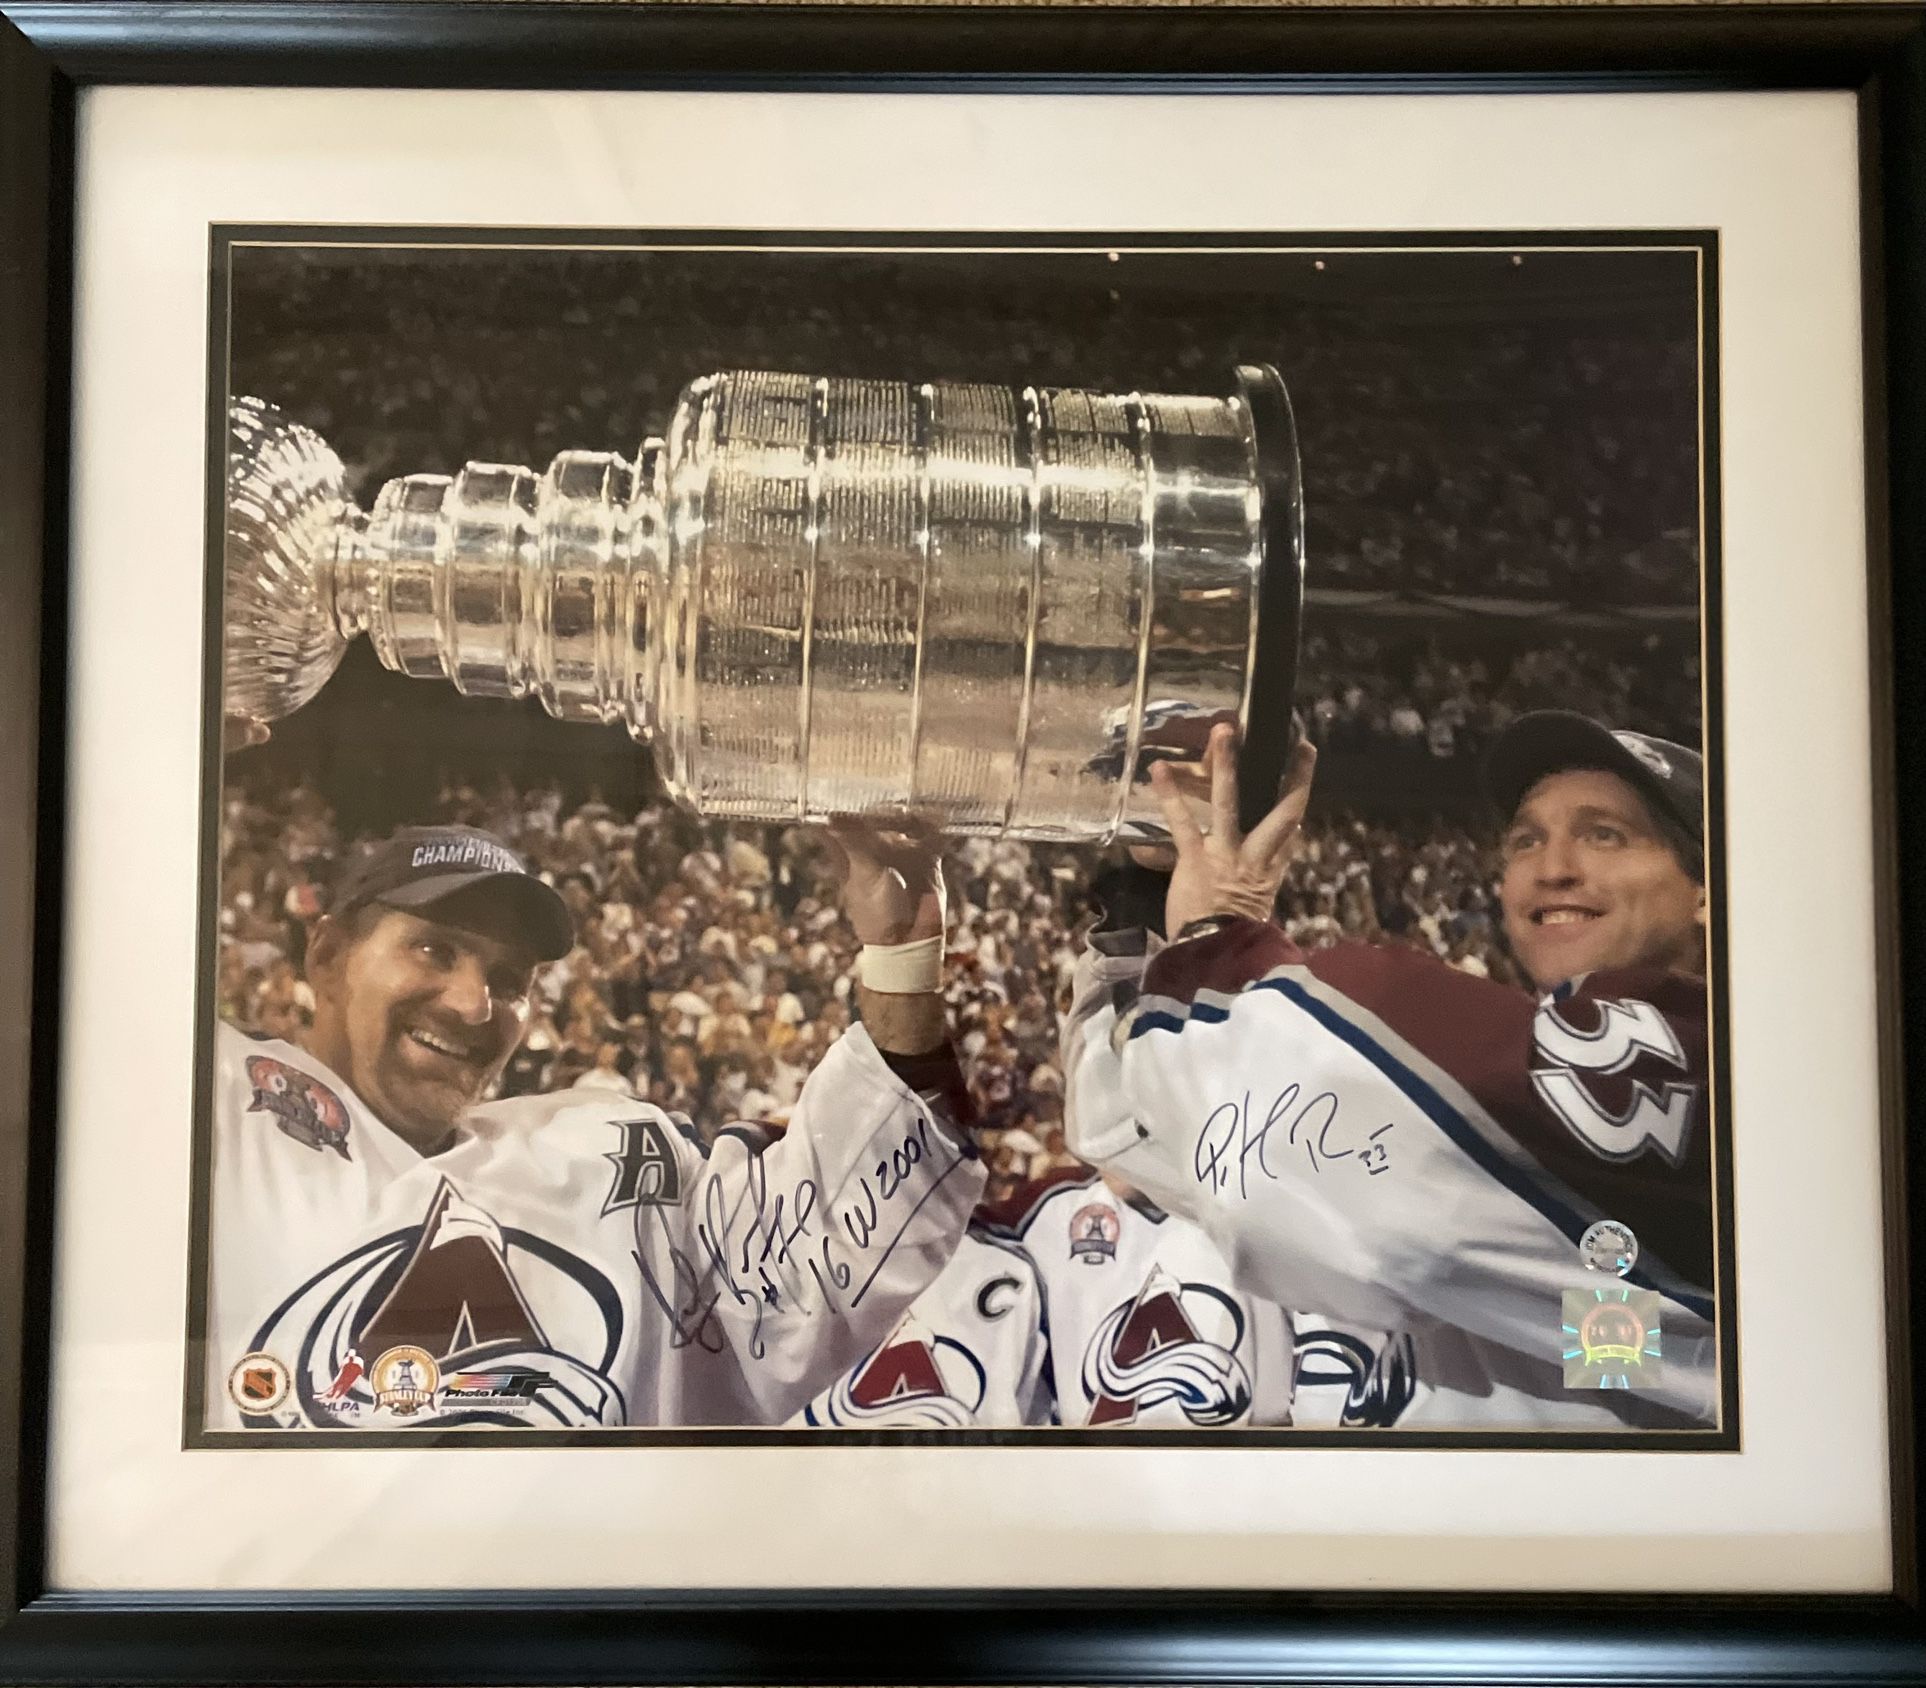 Patrick Roy #33 and Ray Bourque #77 (Mission 16W) Colorado Avalanche NHL 2001 Stanley Cup Celebration Autographed 16X20 Photograph